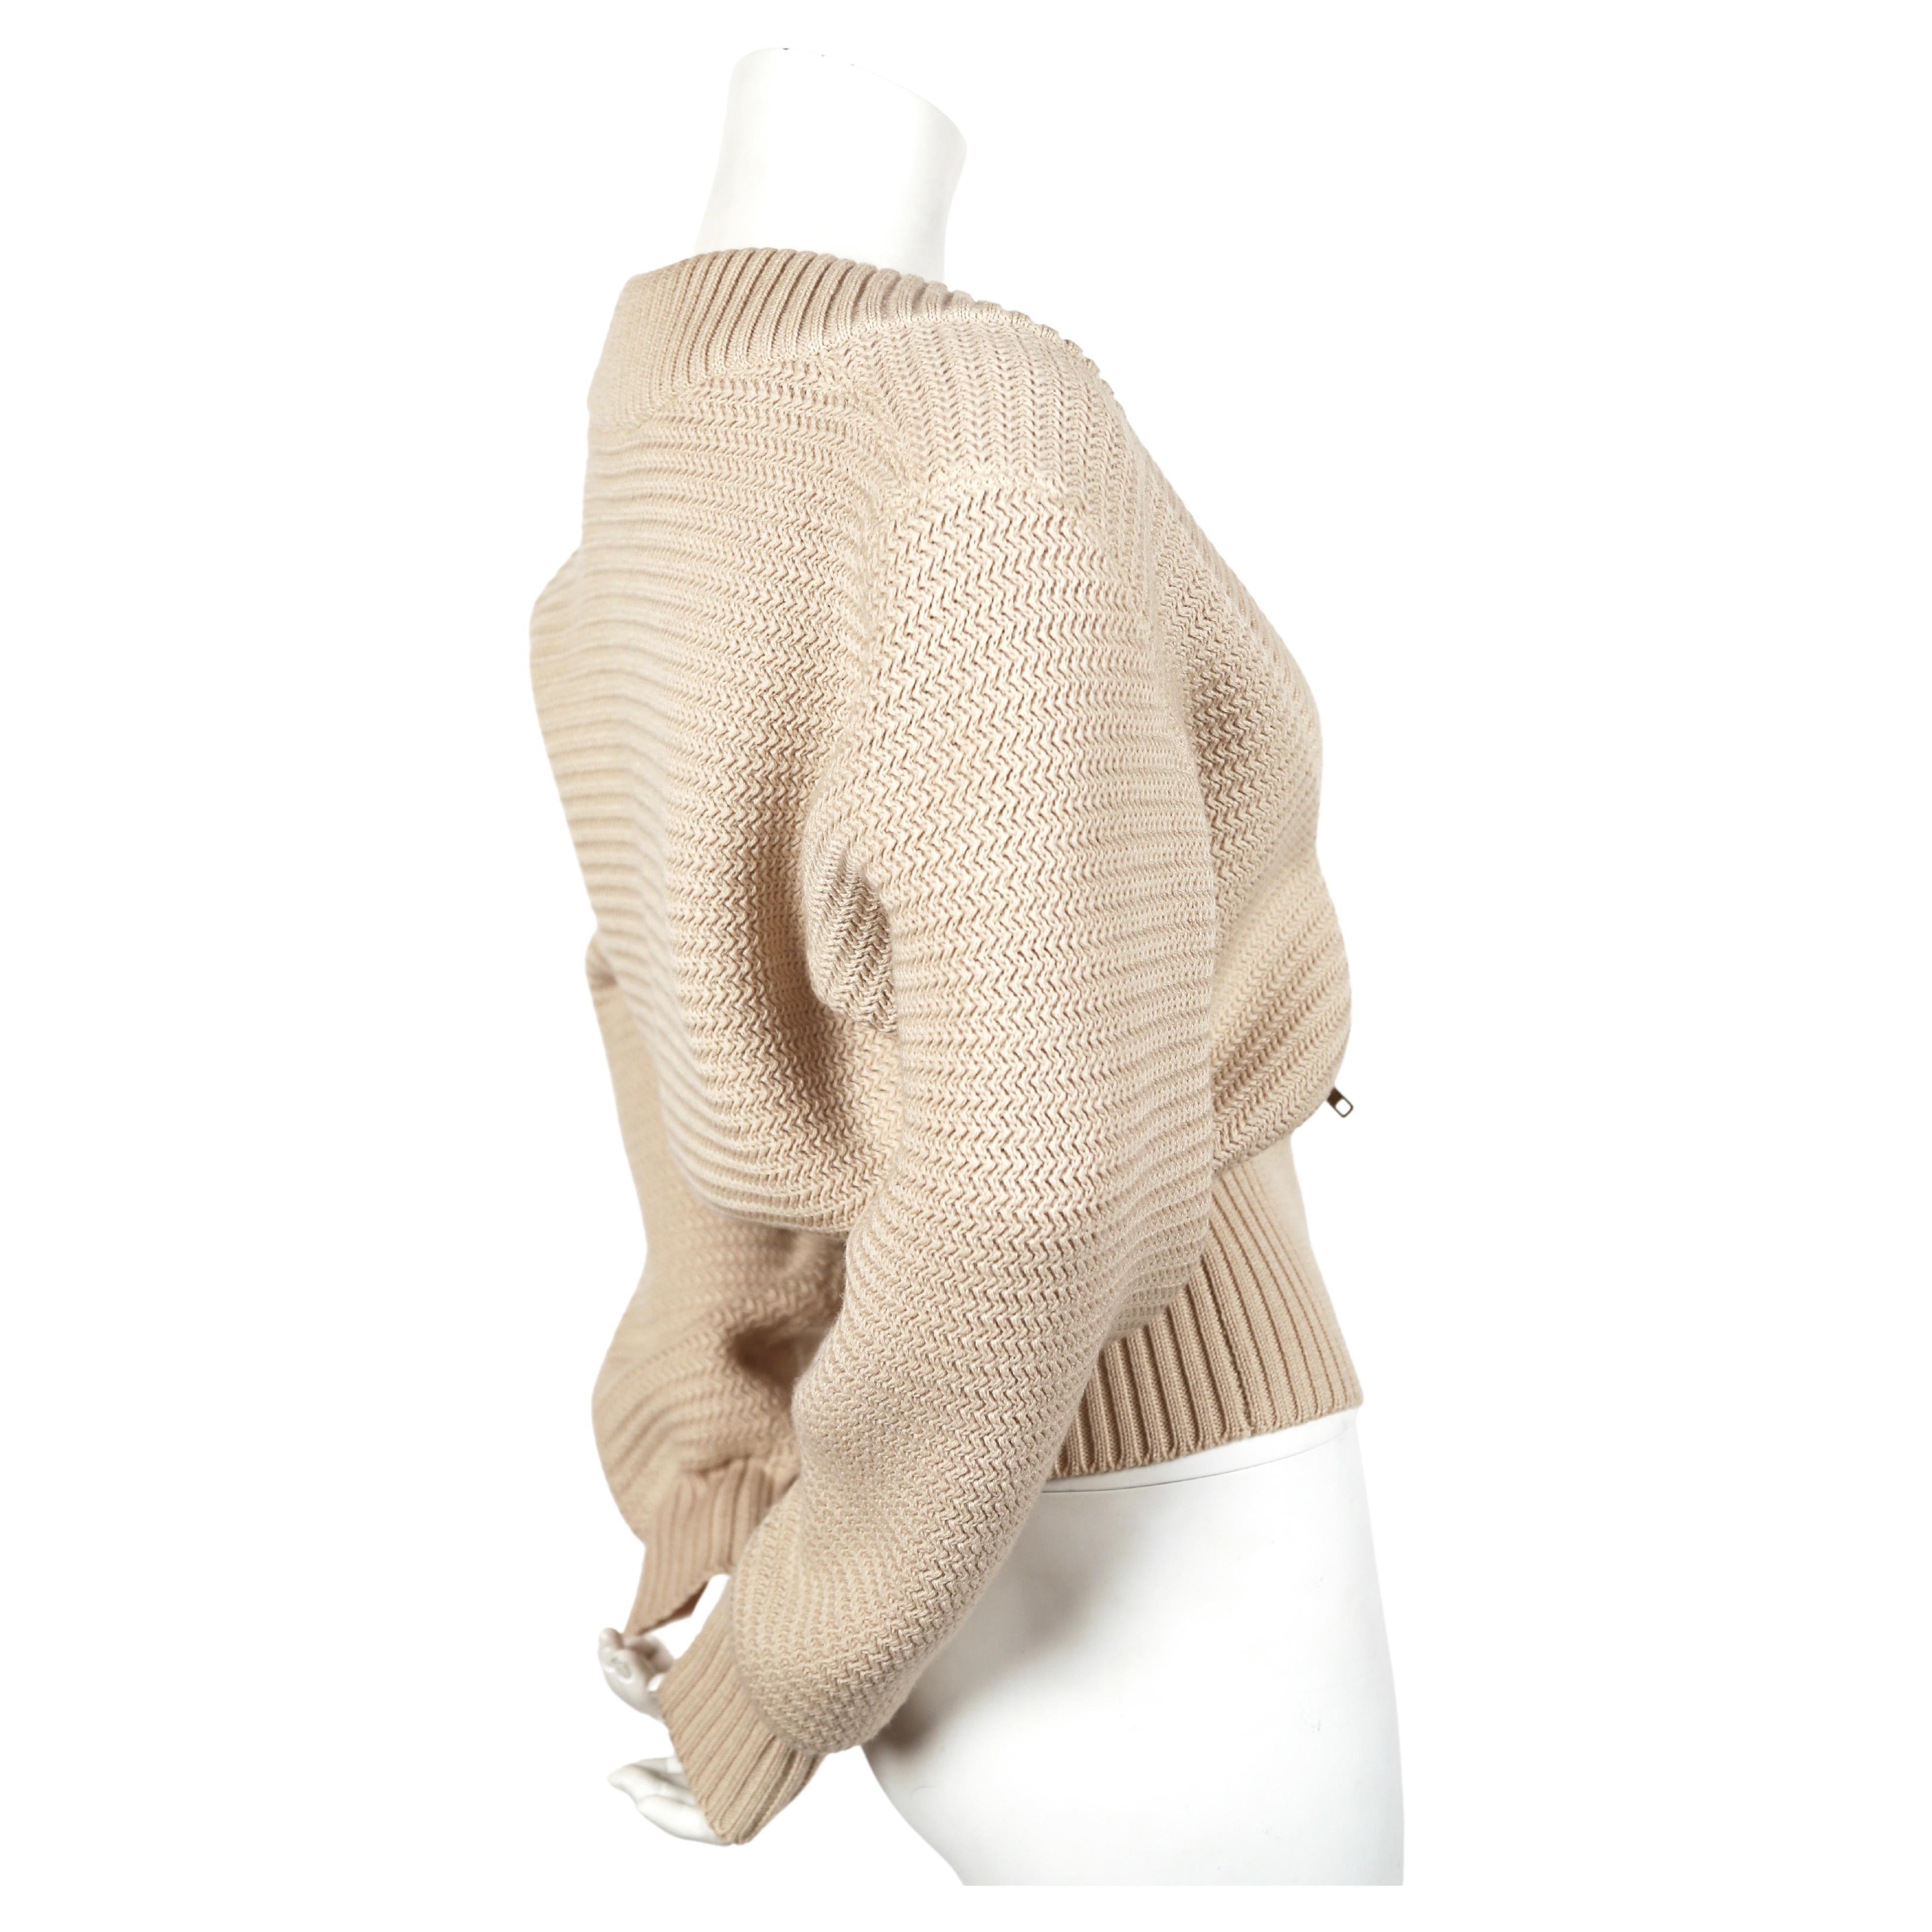 Off-white, densely knit wool cardigan sweater jacket with brass zippers and ribbed trim from Azzedine Alaia dating to fall of 1986, exactly as seen on the runway. Size 'S'. Approximate measurements: drop shoulder 19